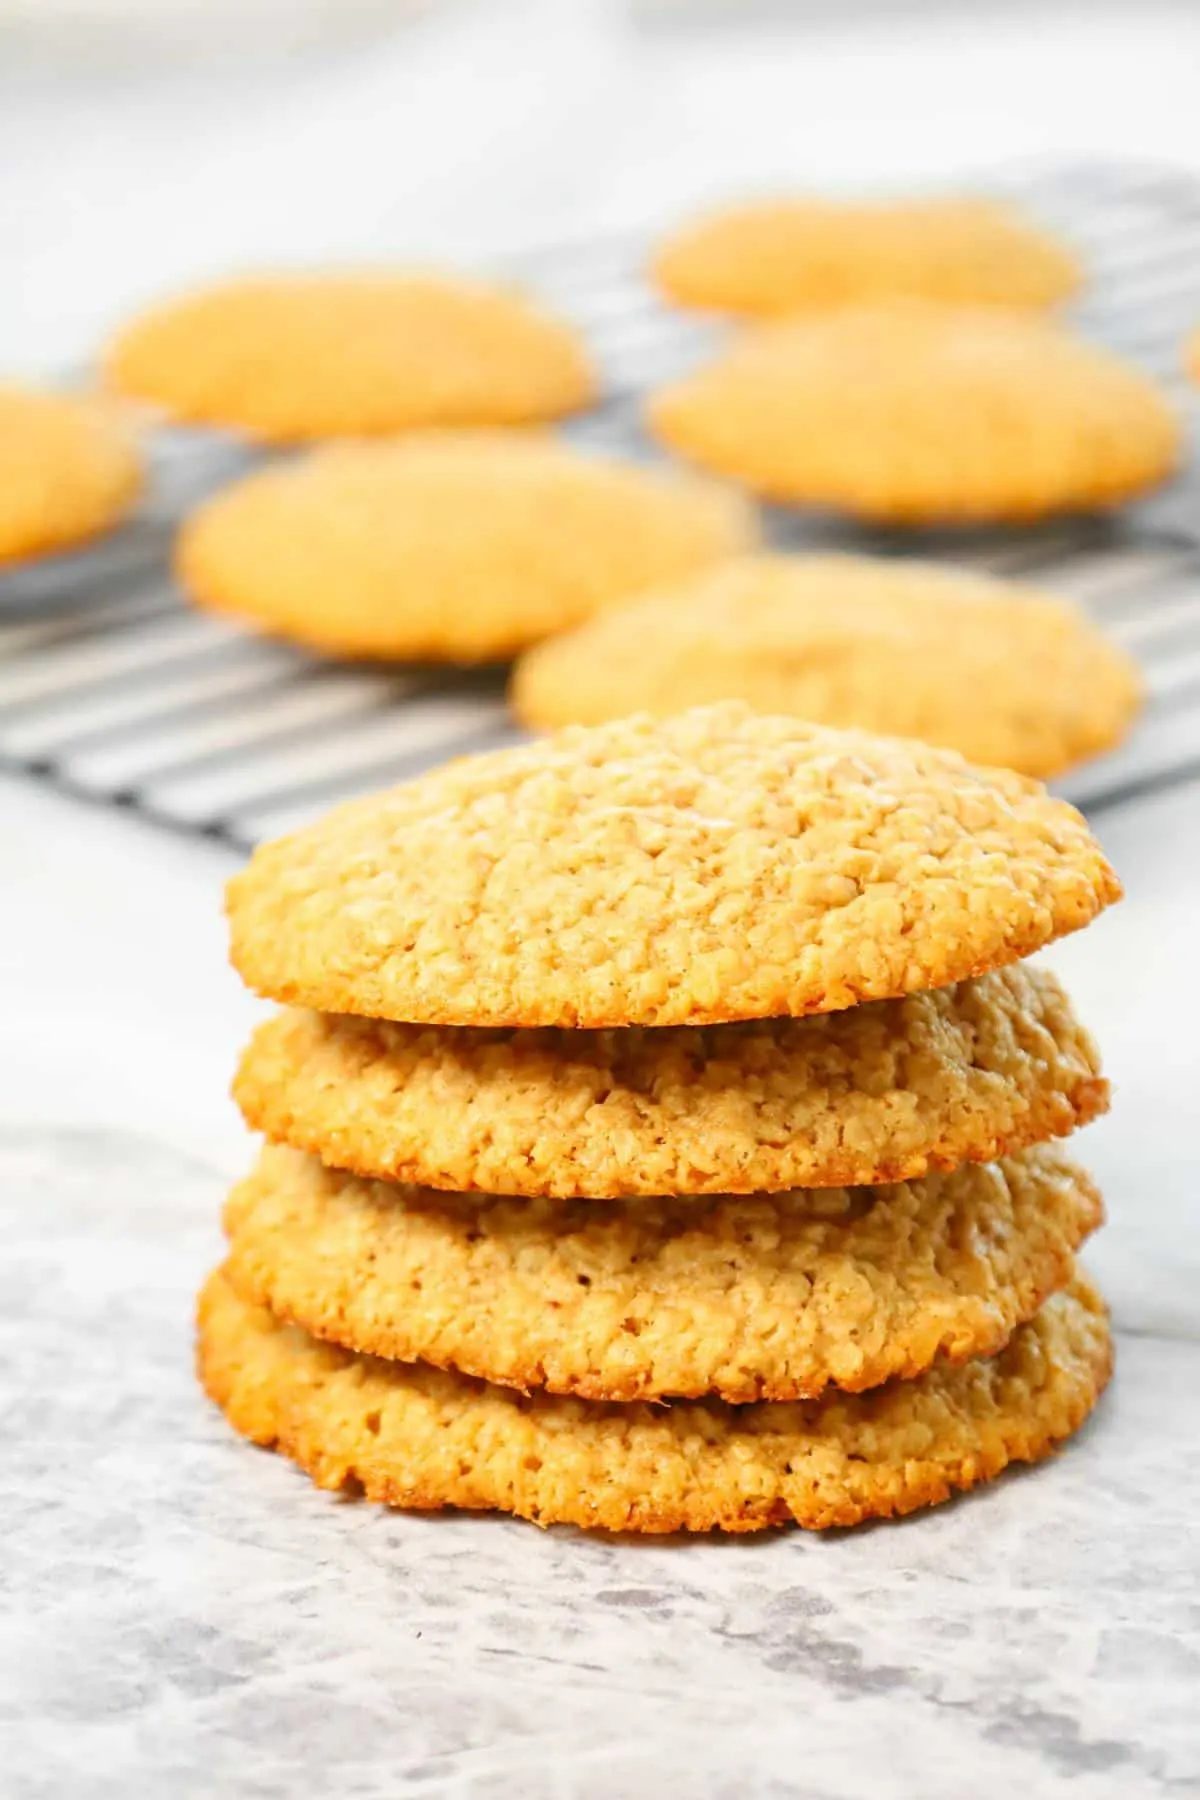 Peanut Butter Oatmeal Cookies are a delicious soft and chewy cookie recipe made with smooth peanut butter and quick oats.